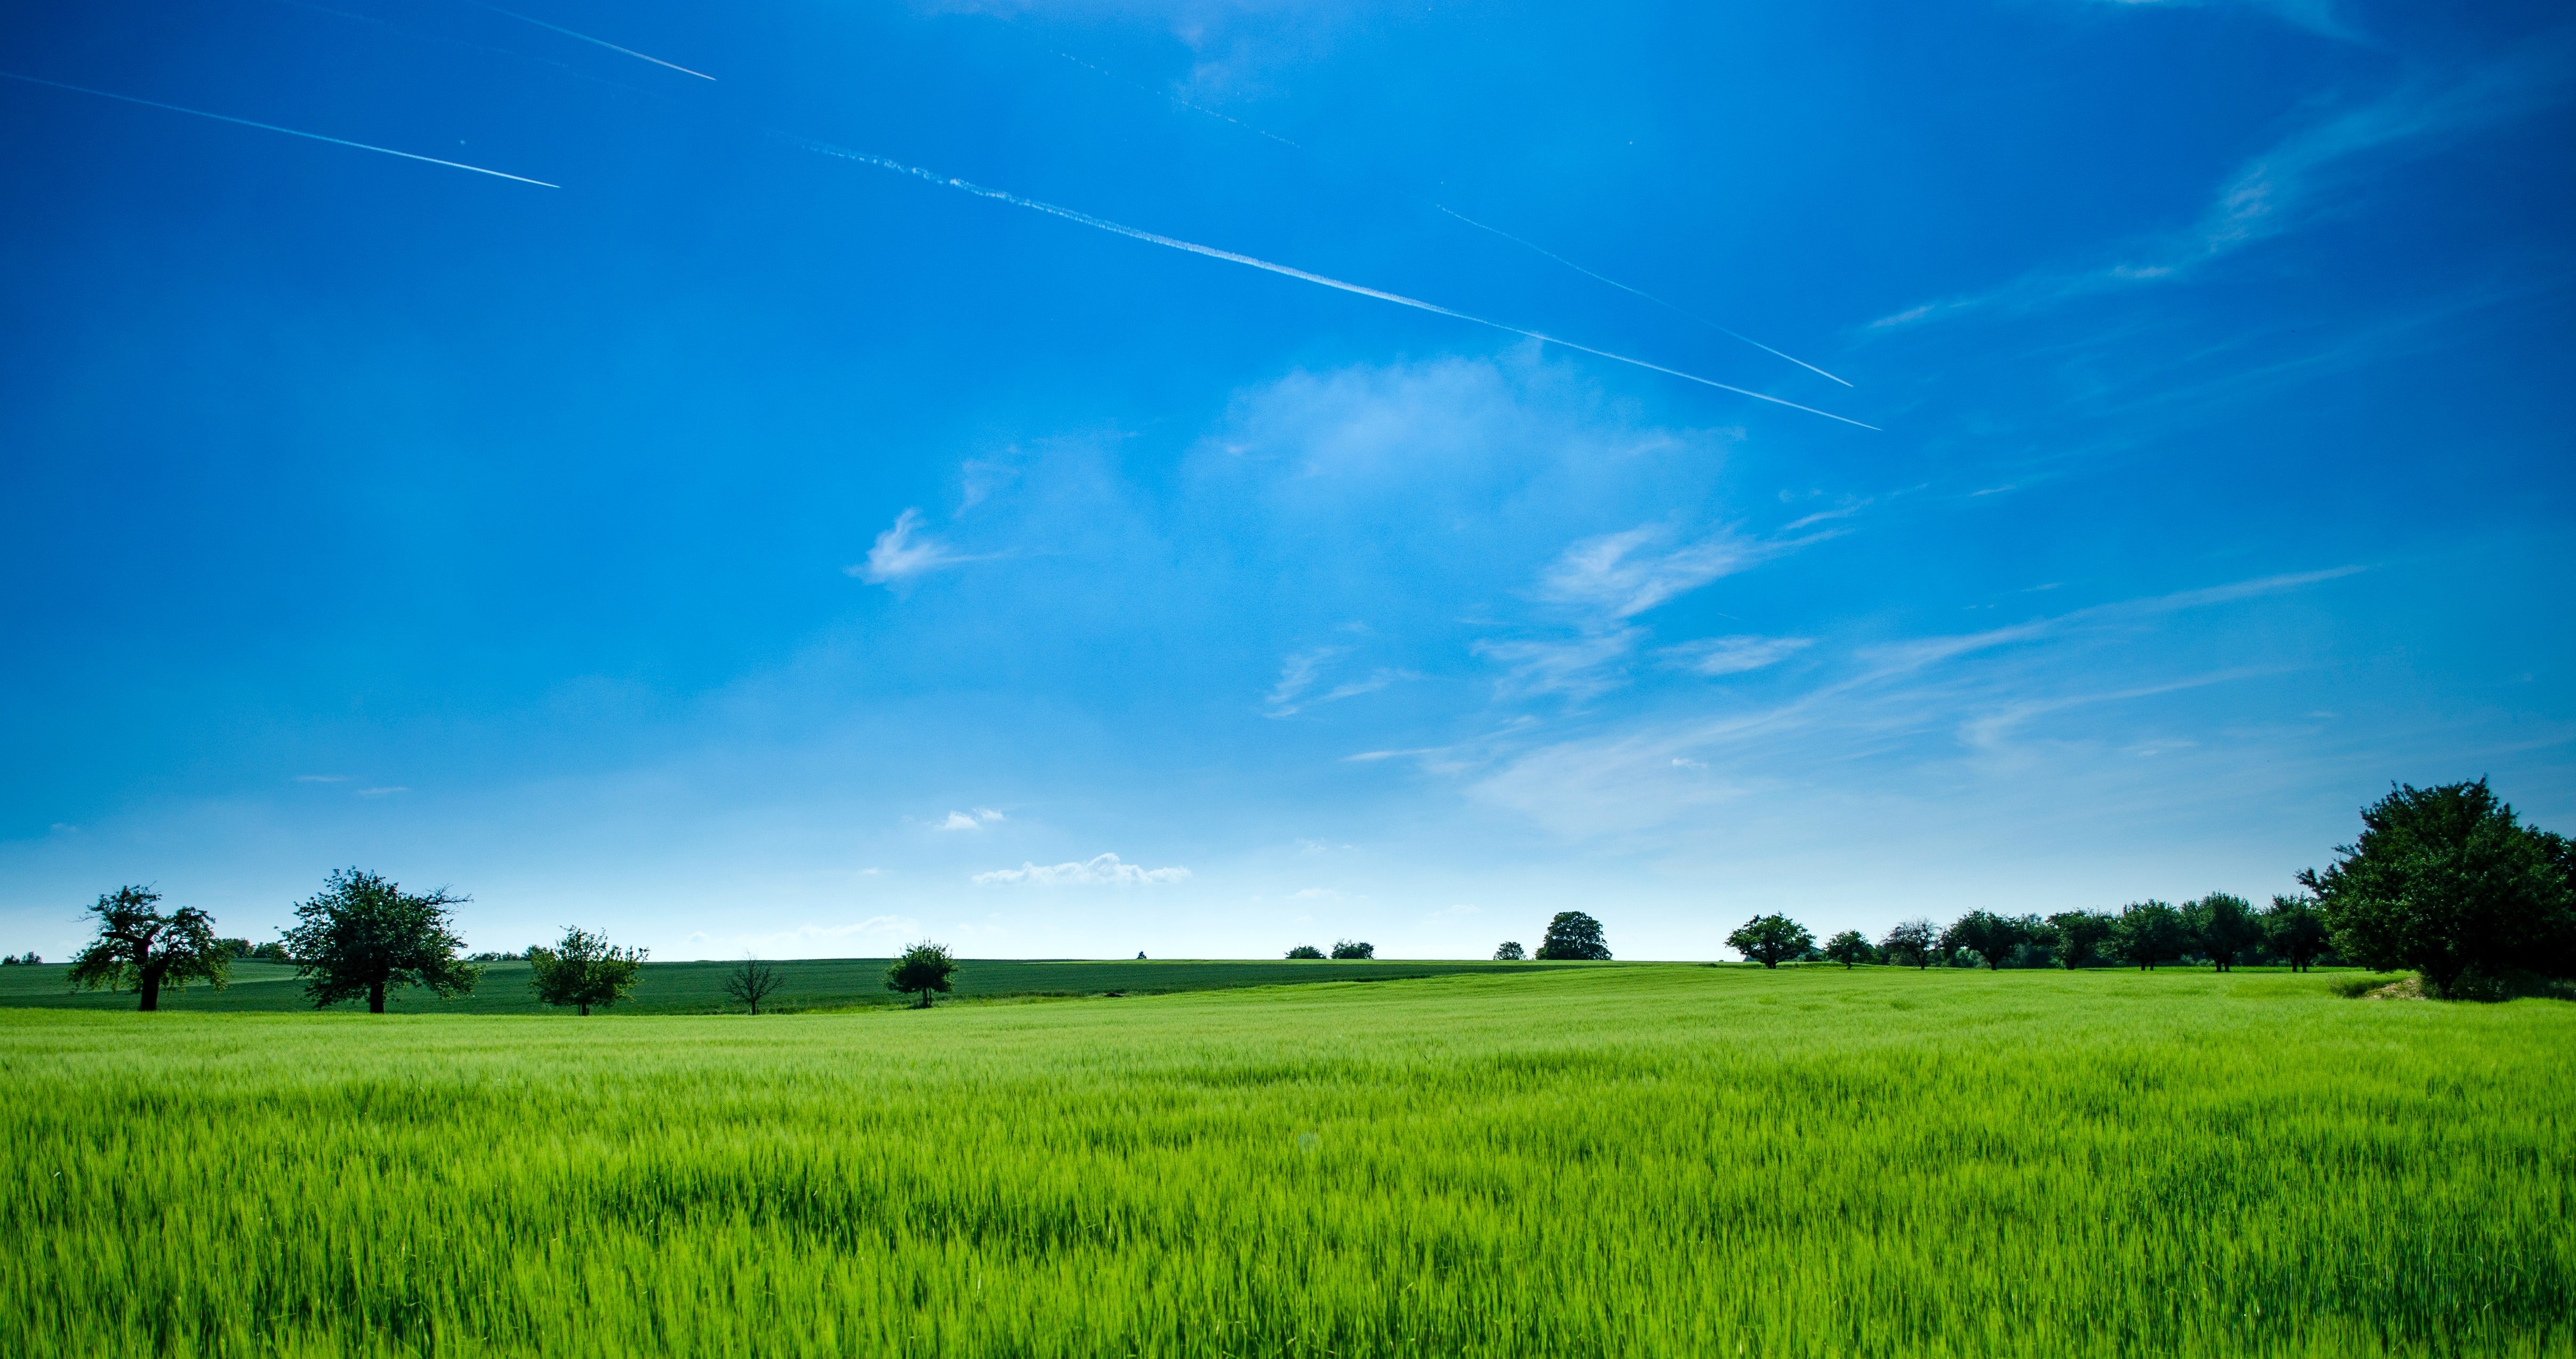 Pictured - A photo of a green field and a clear blue sky | Source: Pexels 